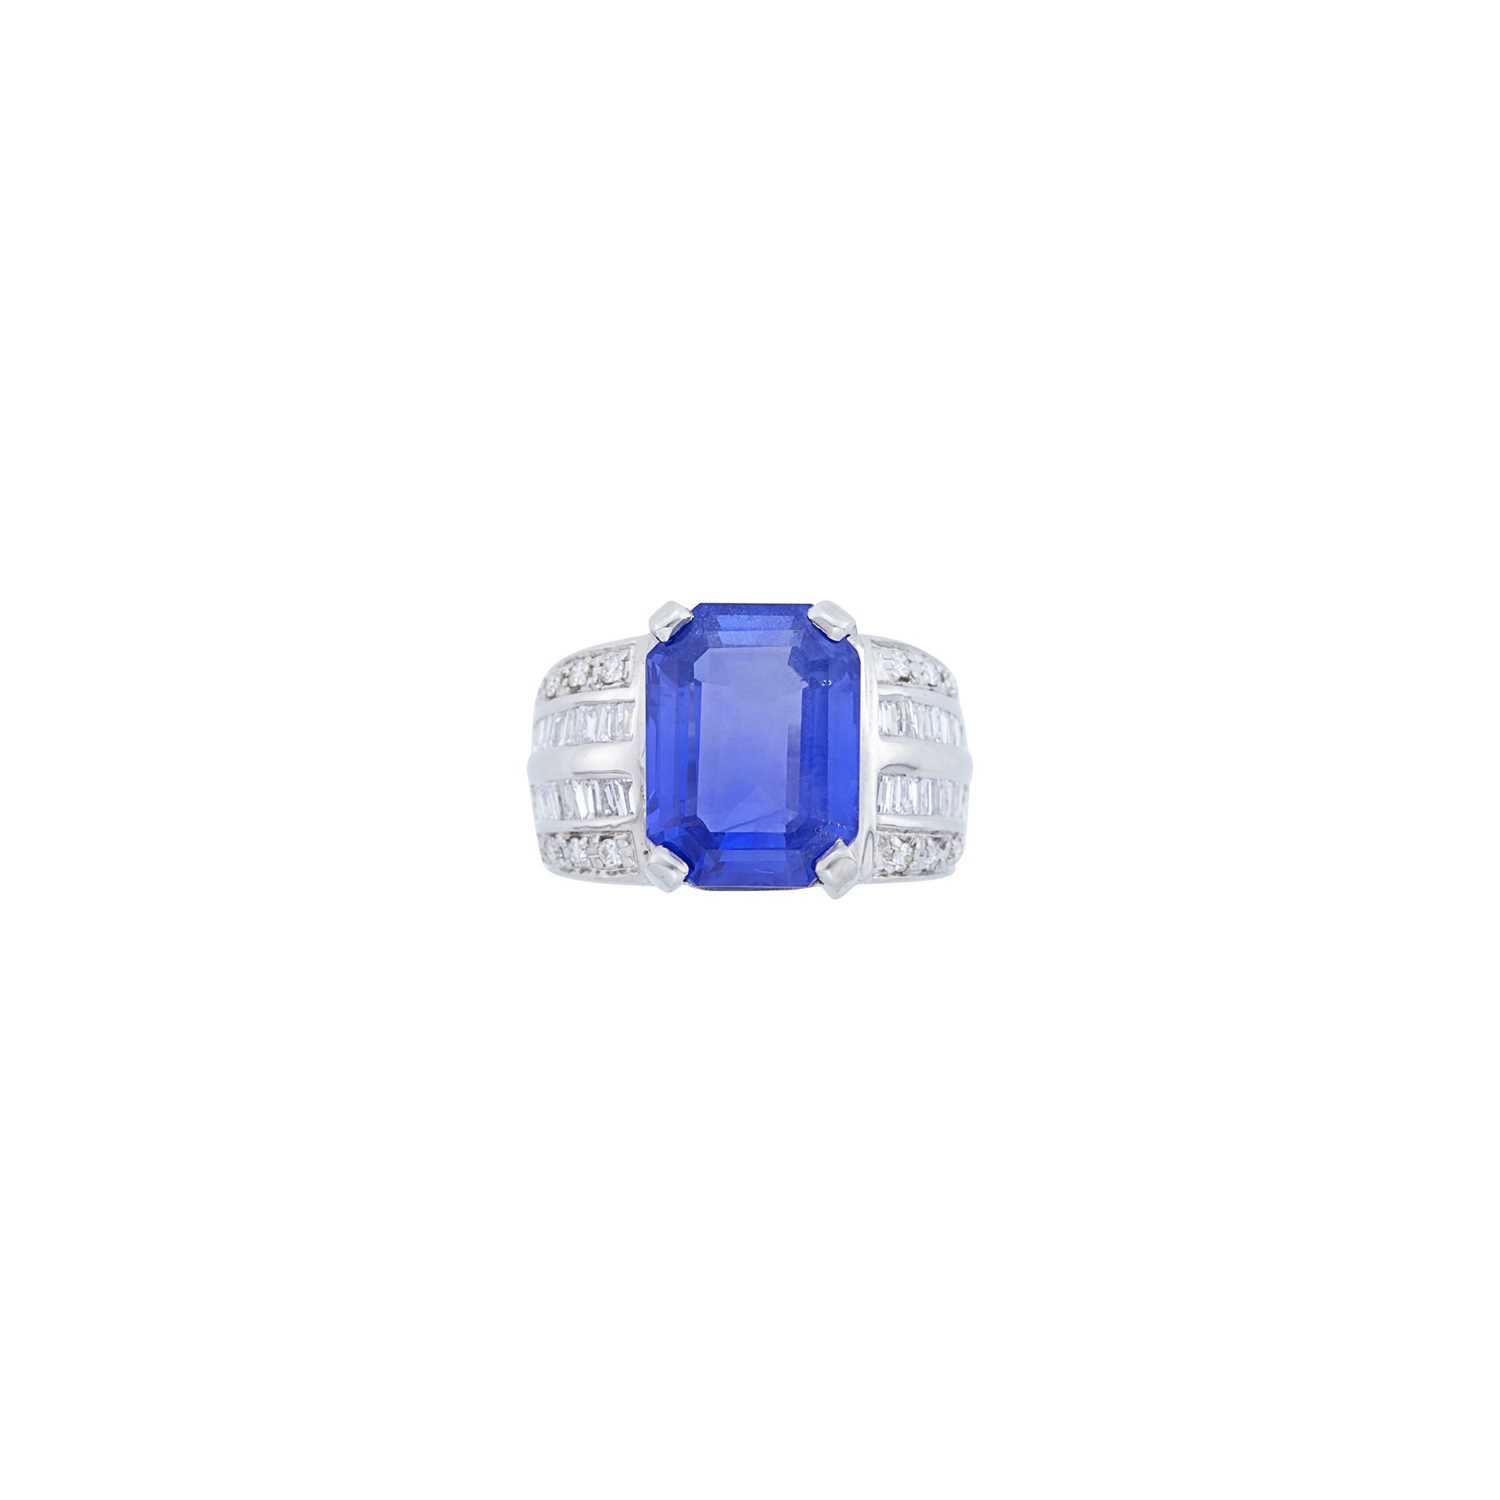 Lot 1108 - White Gold, Sapphire and Diamond Ring